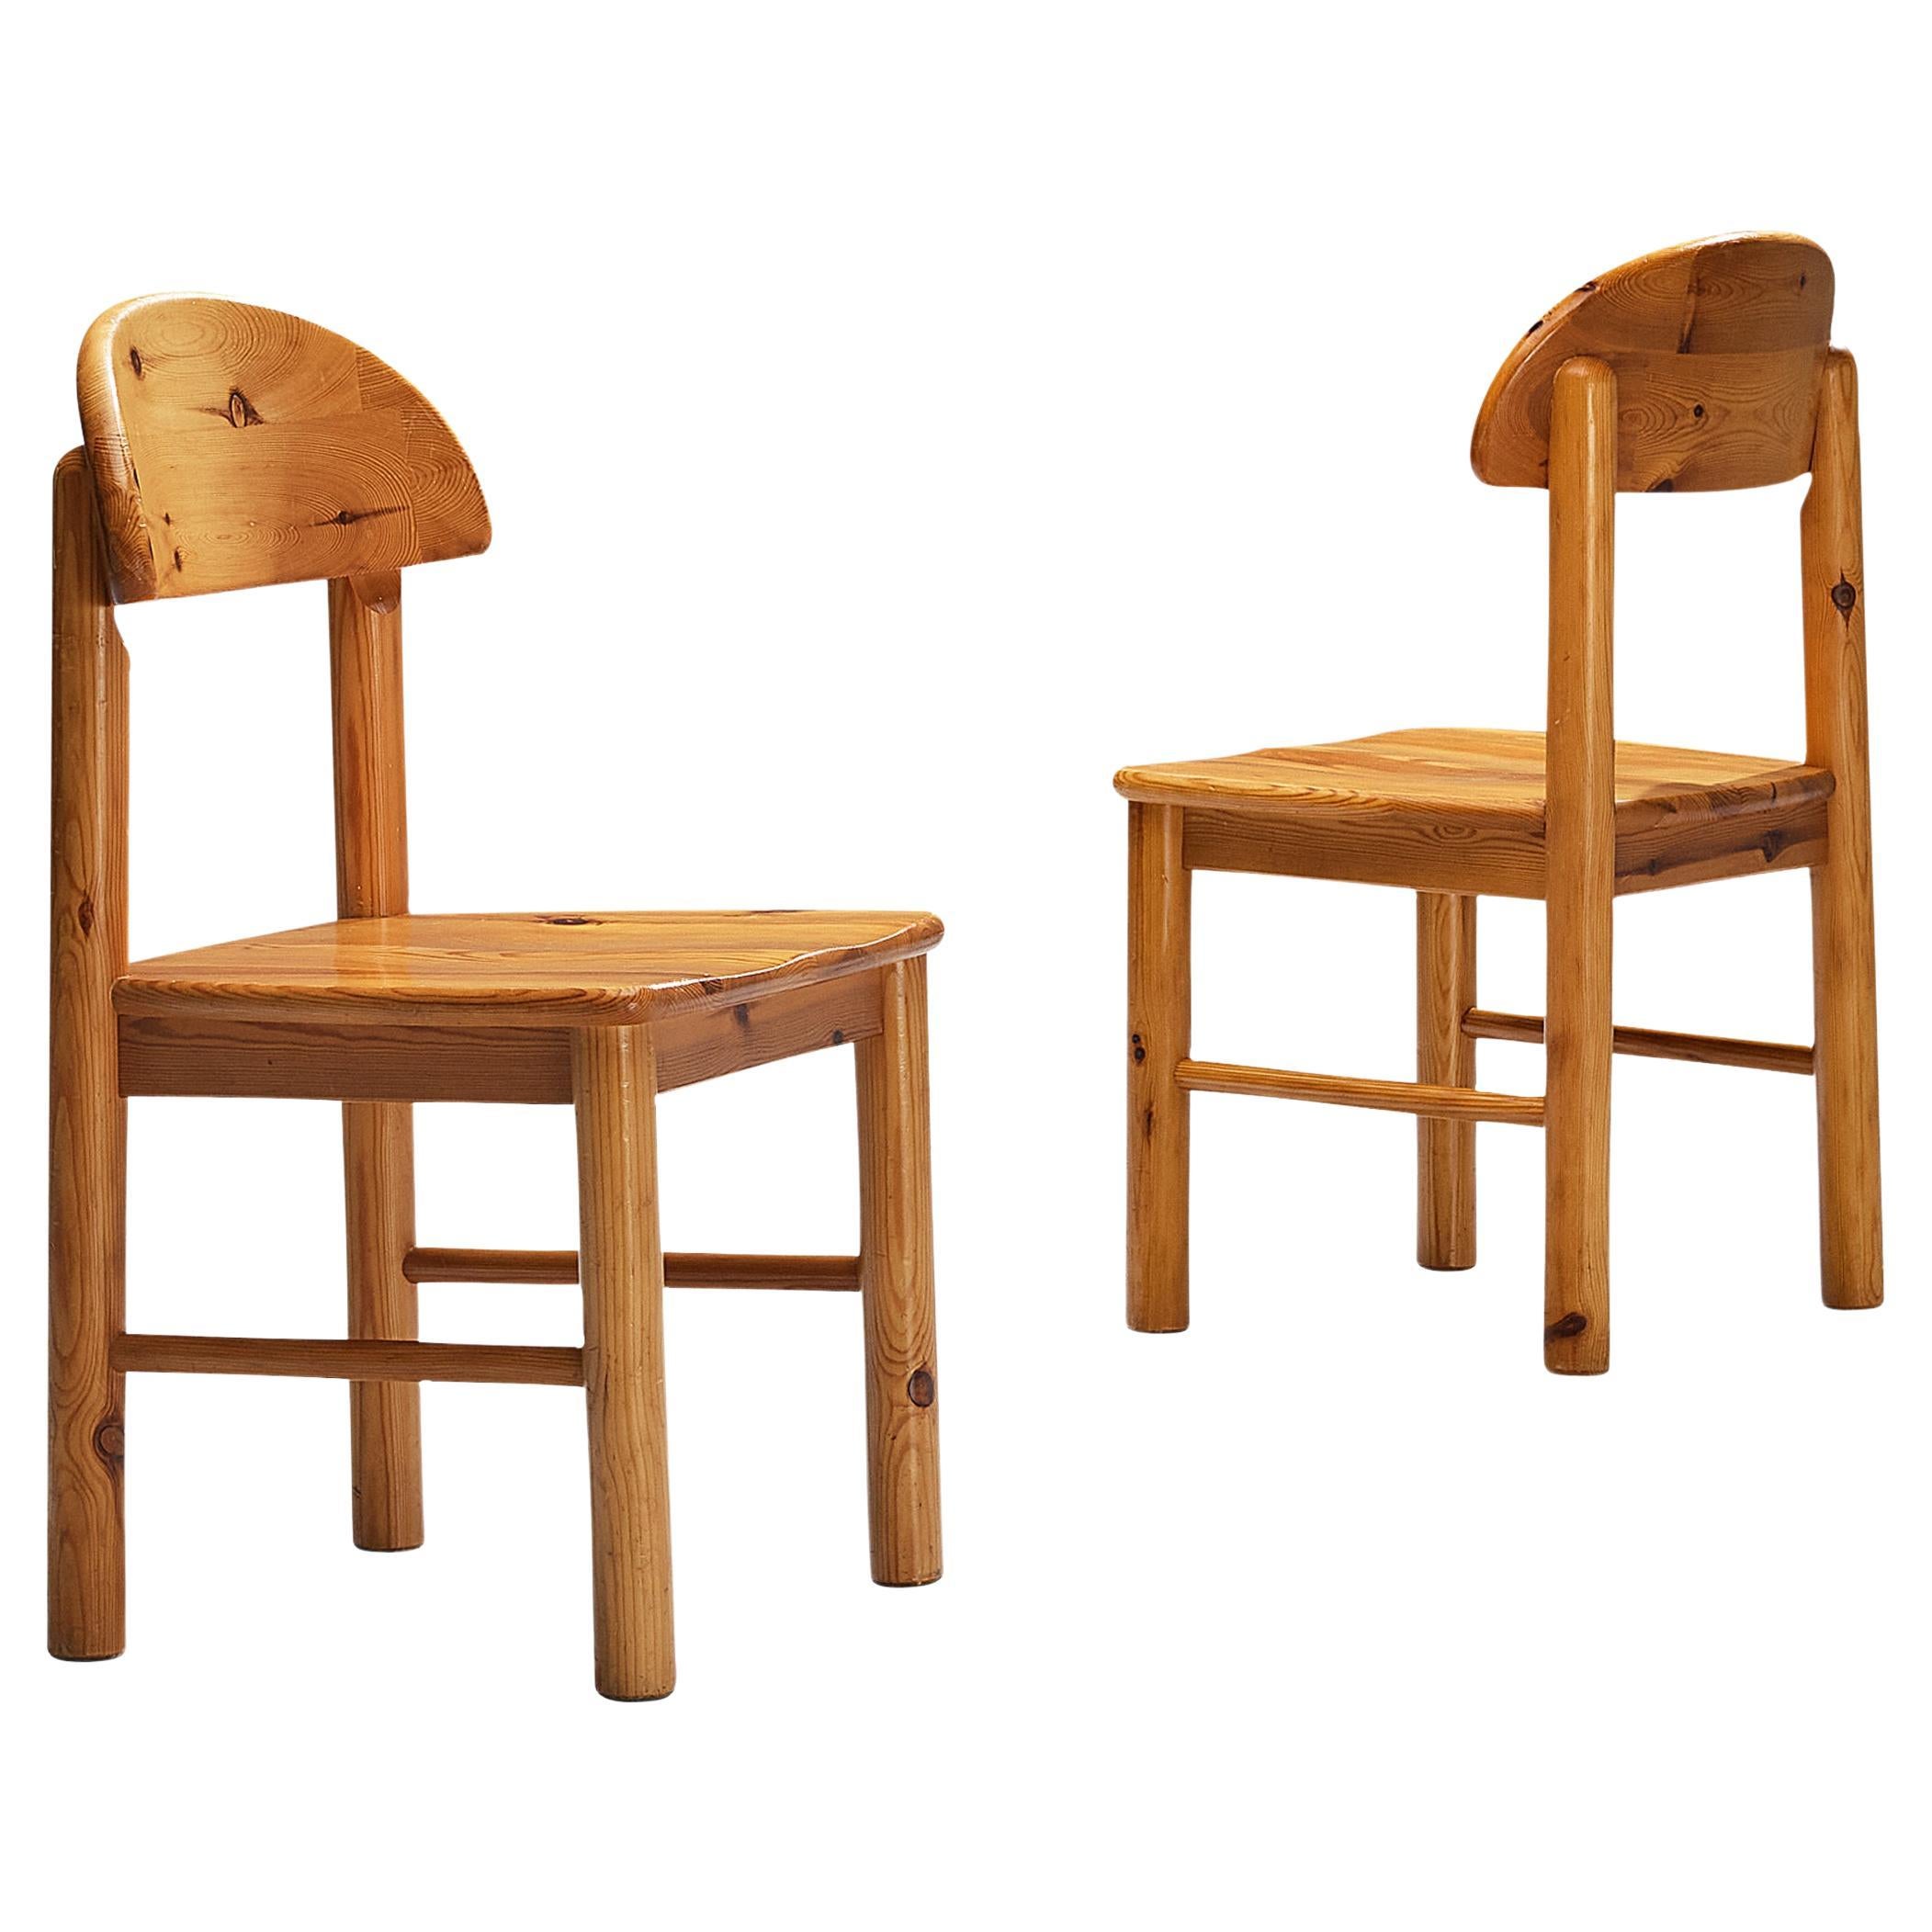 Rainer Daumiller Pair of Dining Chairs in Pine